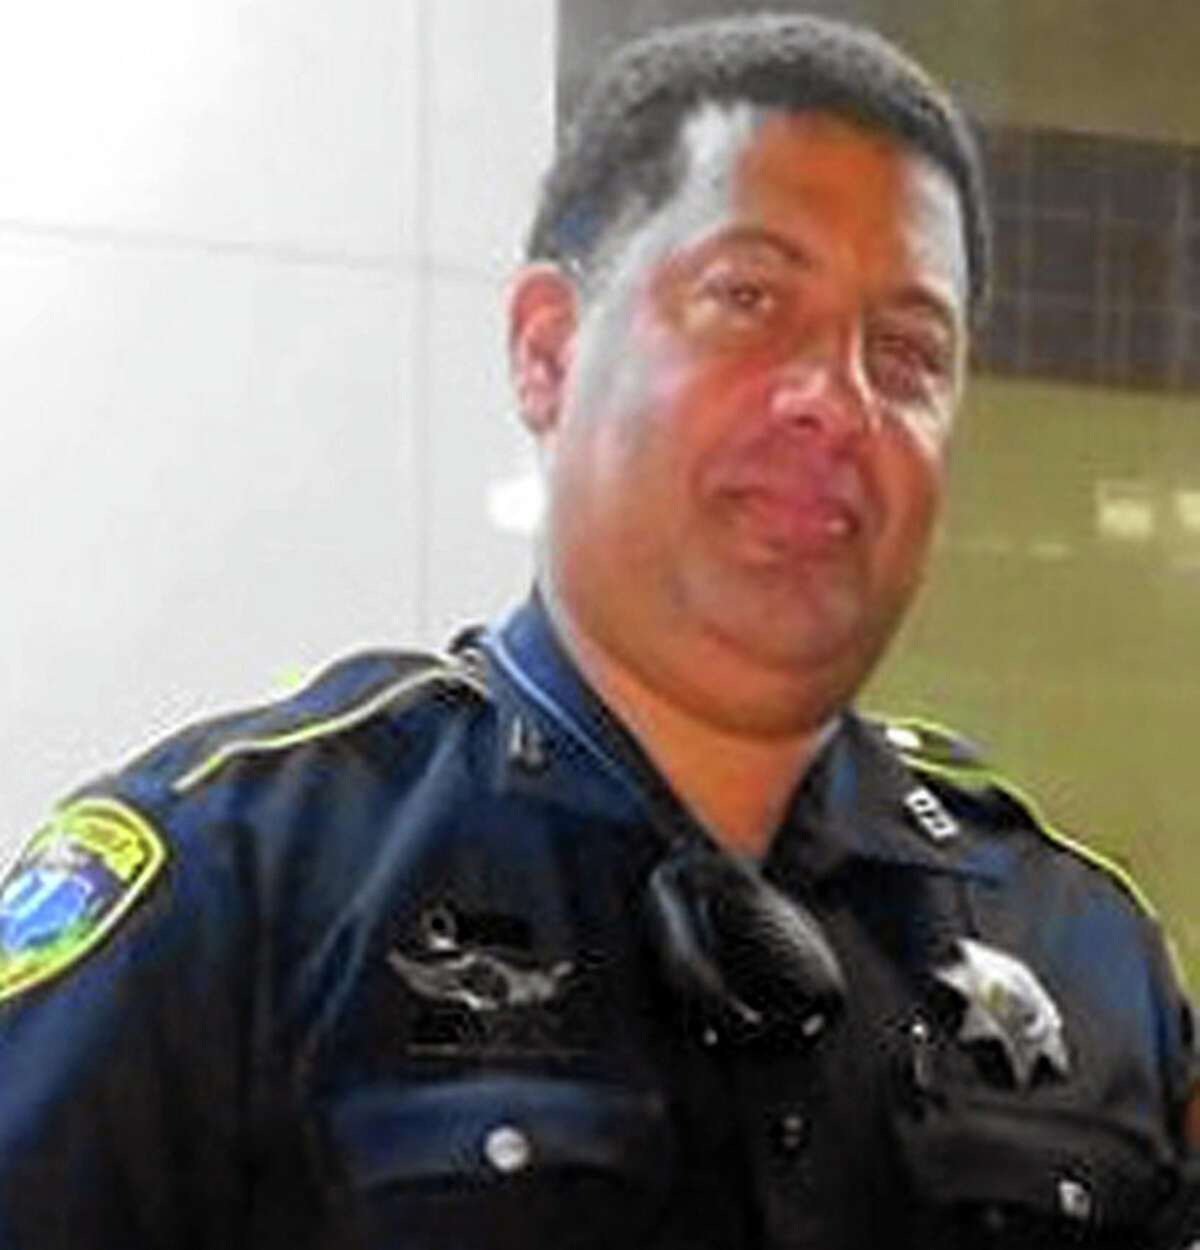 In this undated photo released by Harris County Sheriff's Office, Harris County Deputy Constable Alden Clopton is seen. Clopton was shot multiple times from behind late Wednesday, while talking to another constable following a traffic stop in Houston. Clopton was wearing a protective vest when he was shot and is expected to recover after undergoing several hours of surgery. (Harris County Sheriff's Office via AP) ORG XMIT: CER102